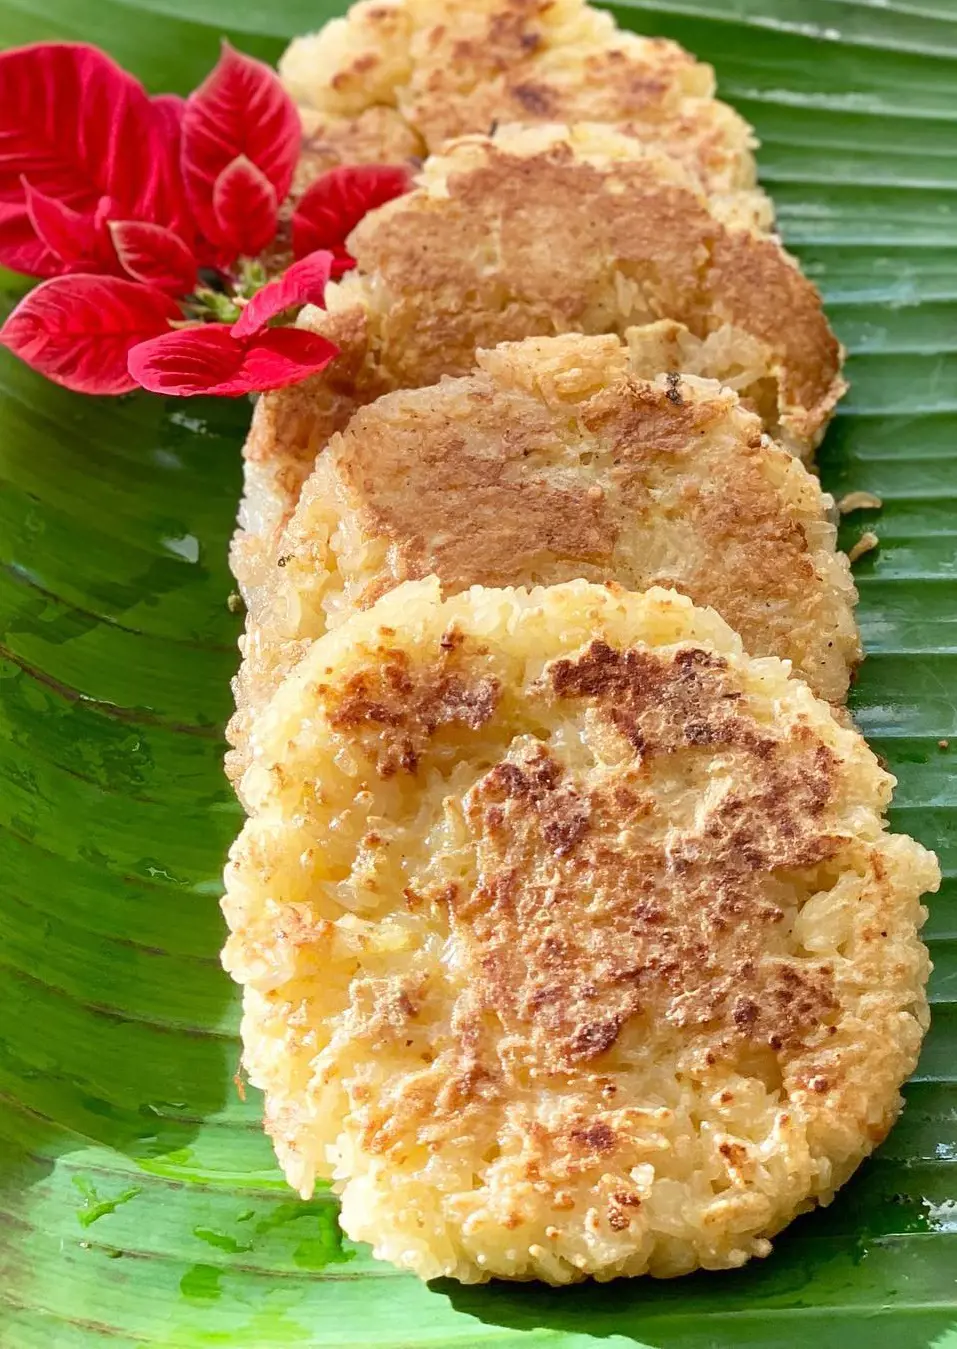 Lao sticky rice omelet Khao Gee is a delicious snack good with sweet chili sauce